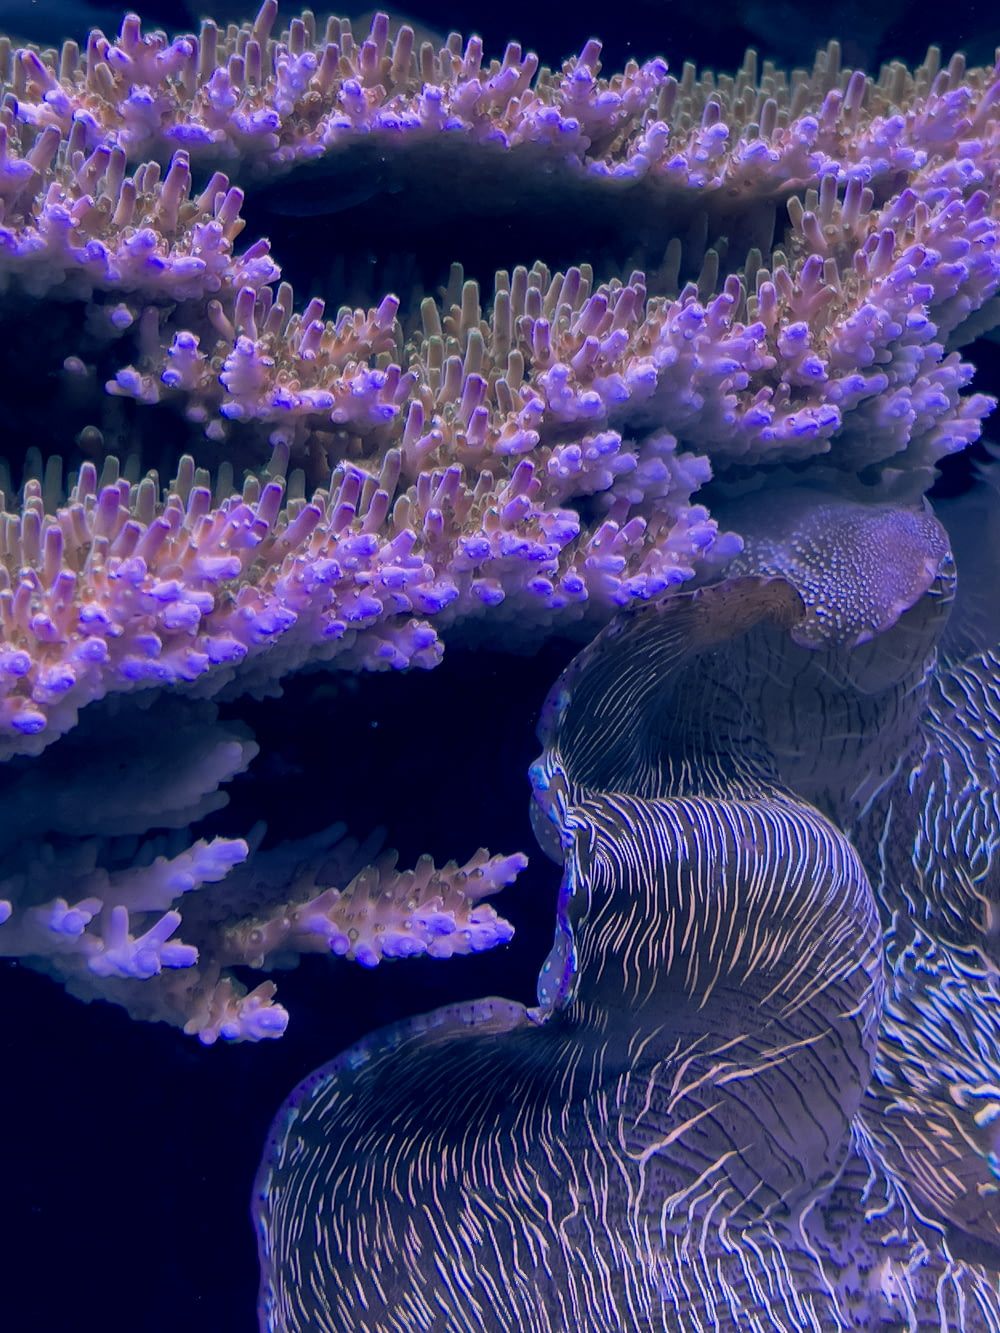 a close-up of some coral